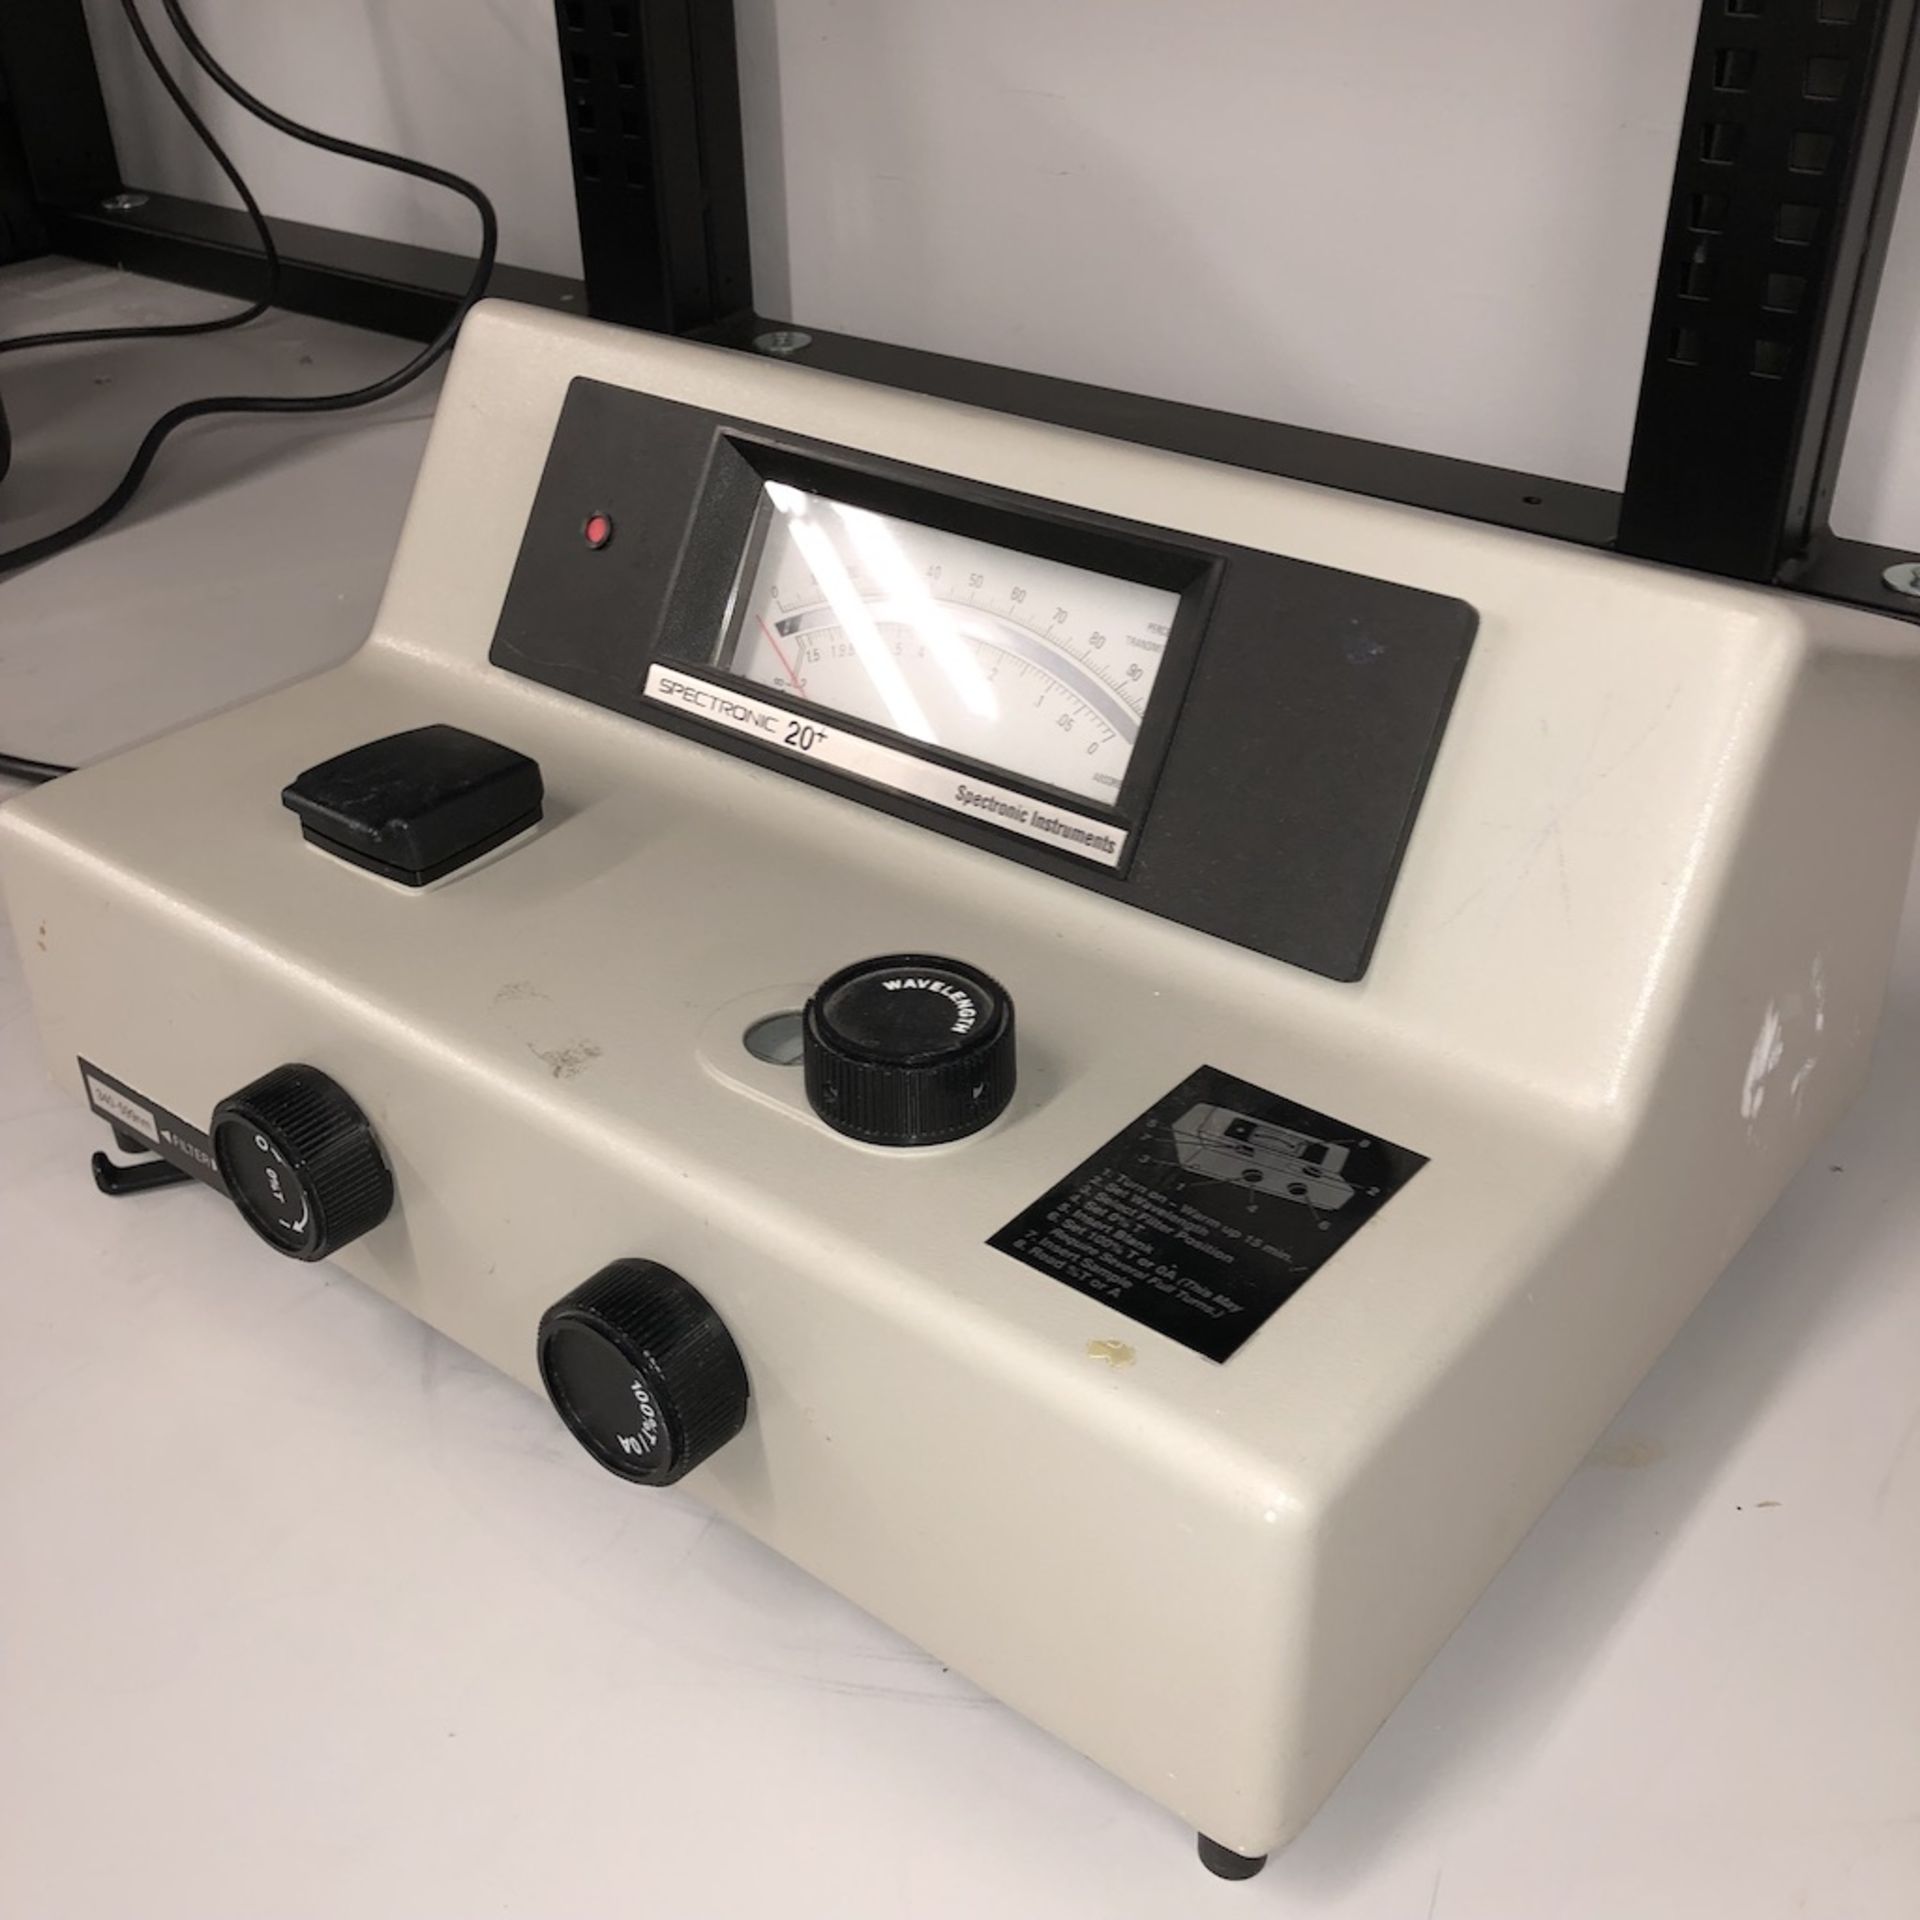 SPECTRONIC INSTRUMENTS 333182 SPECTRONIC 20+ SPECTROMETER - Image 5 of 7